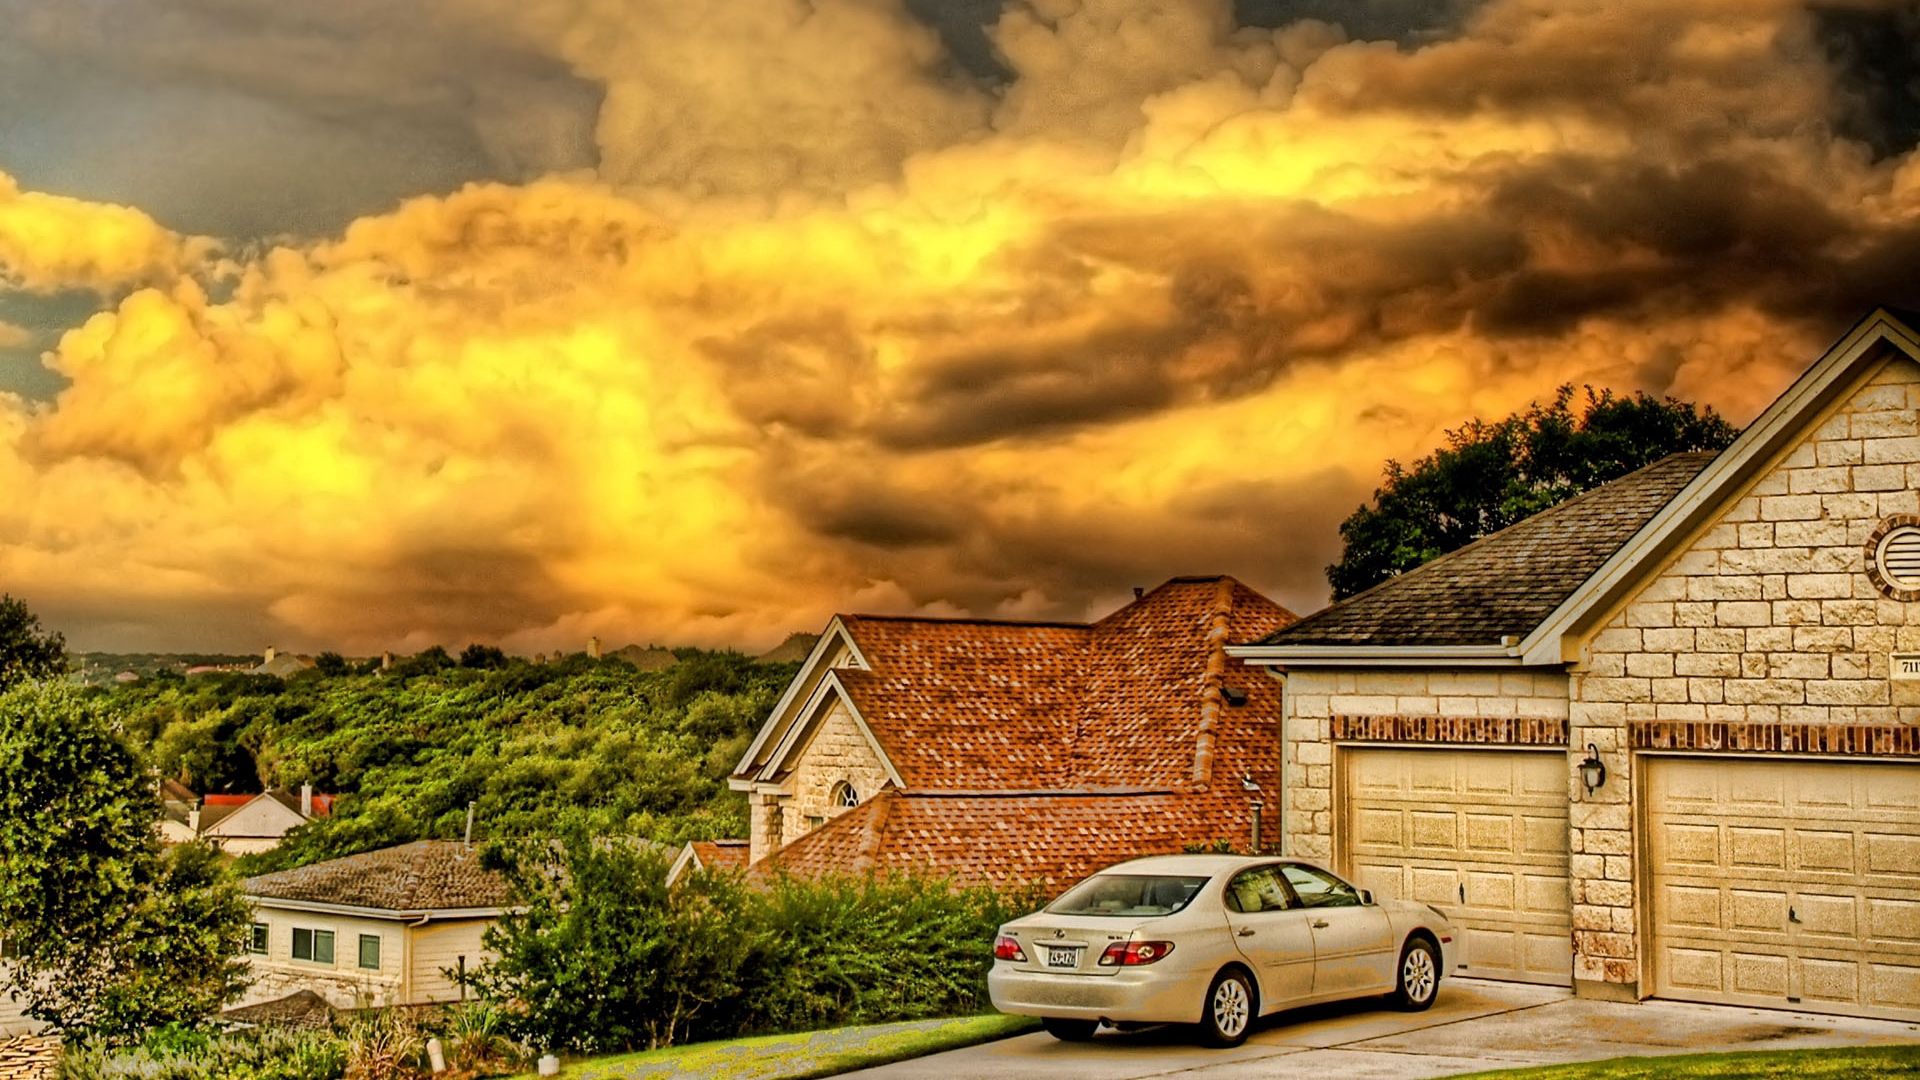 wallpapers cities, building, car, hdr, garage